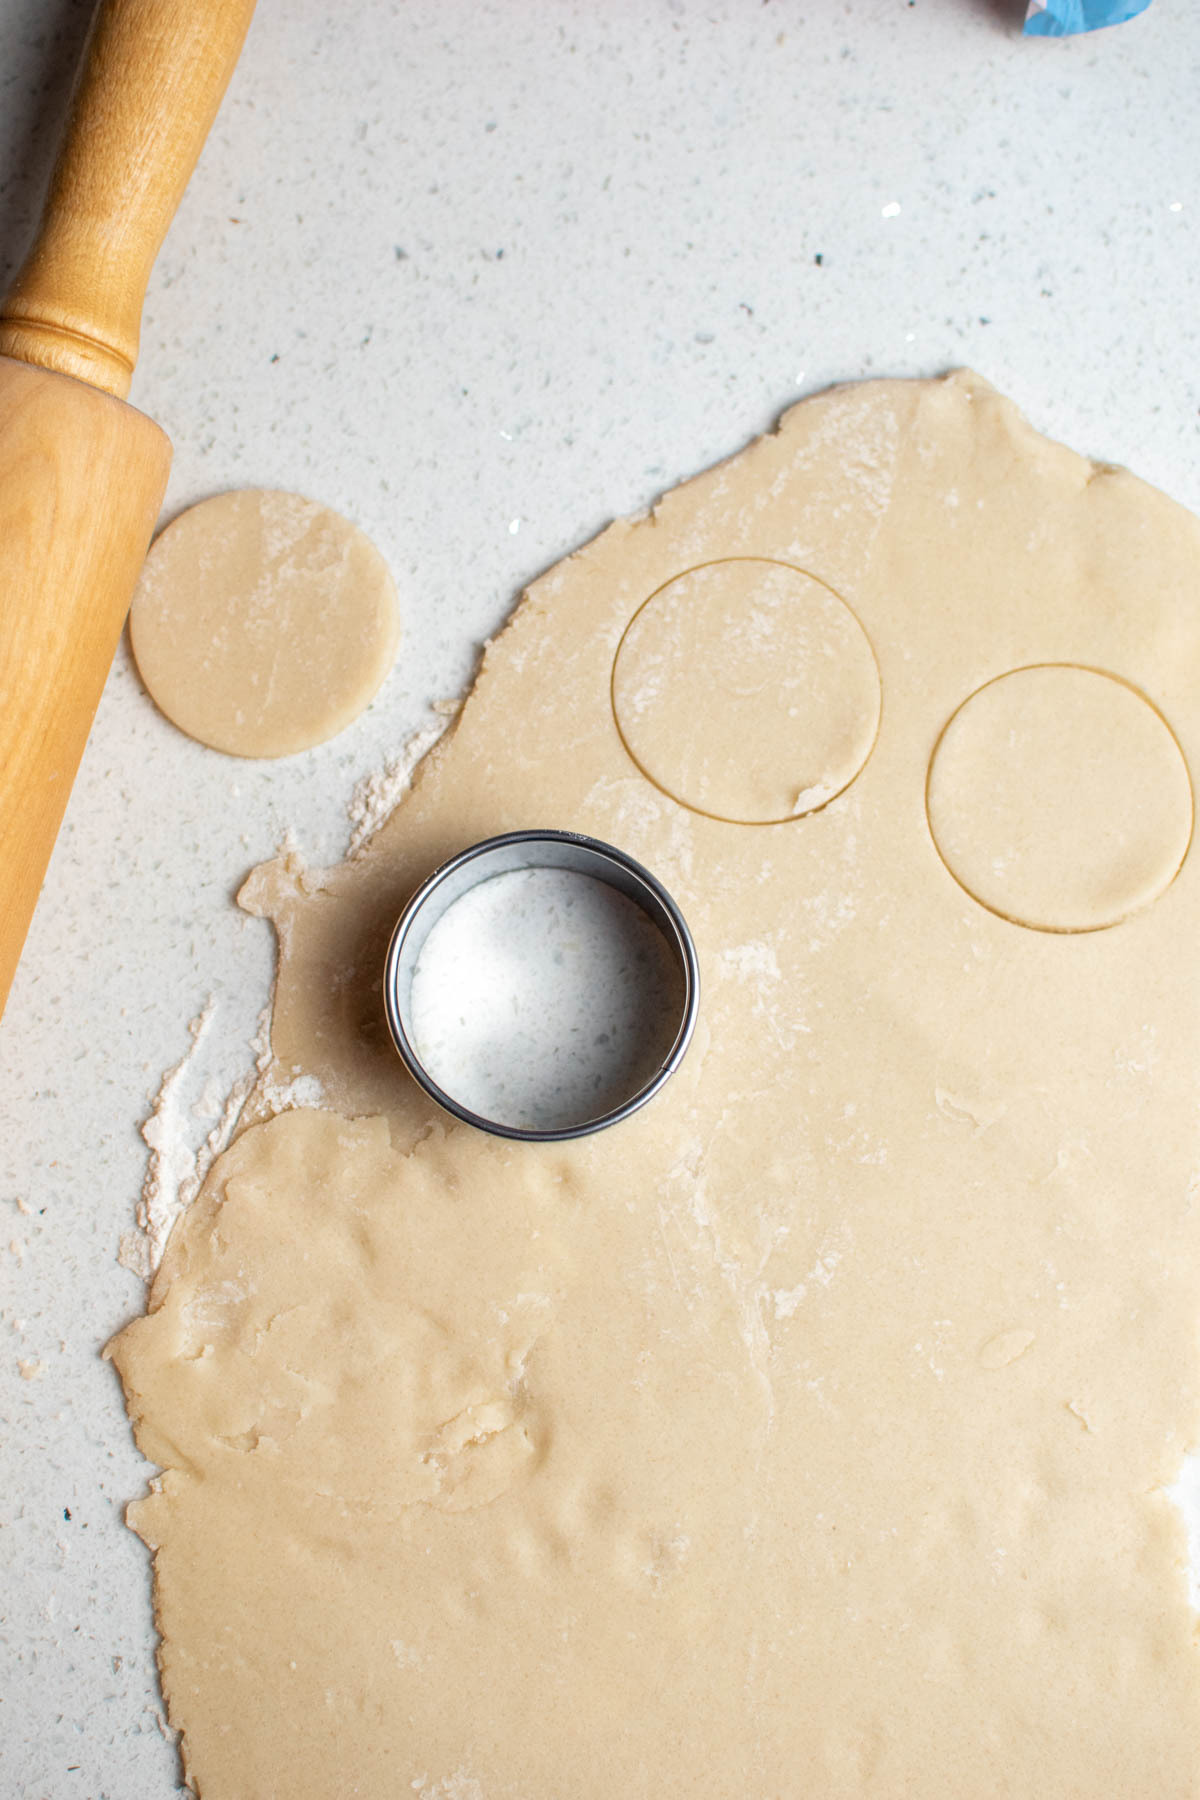 Rolled cookie dough with circles cut out and cookie cutter on dough.